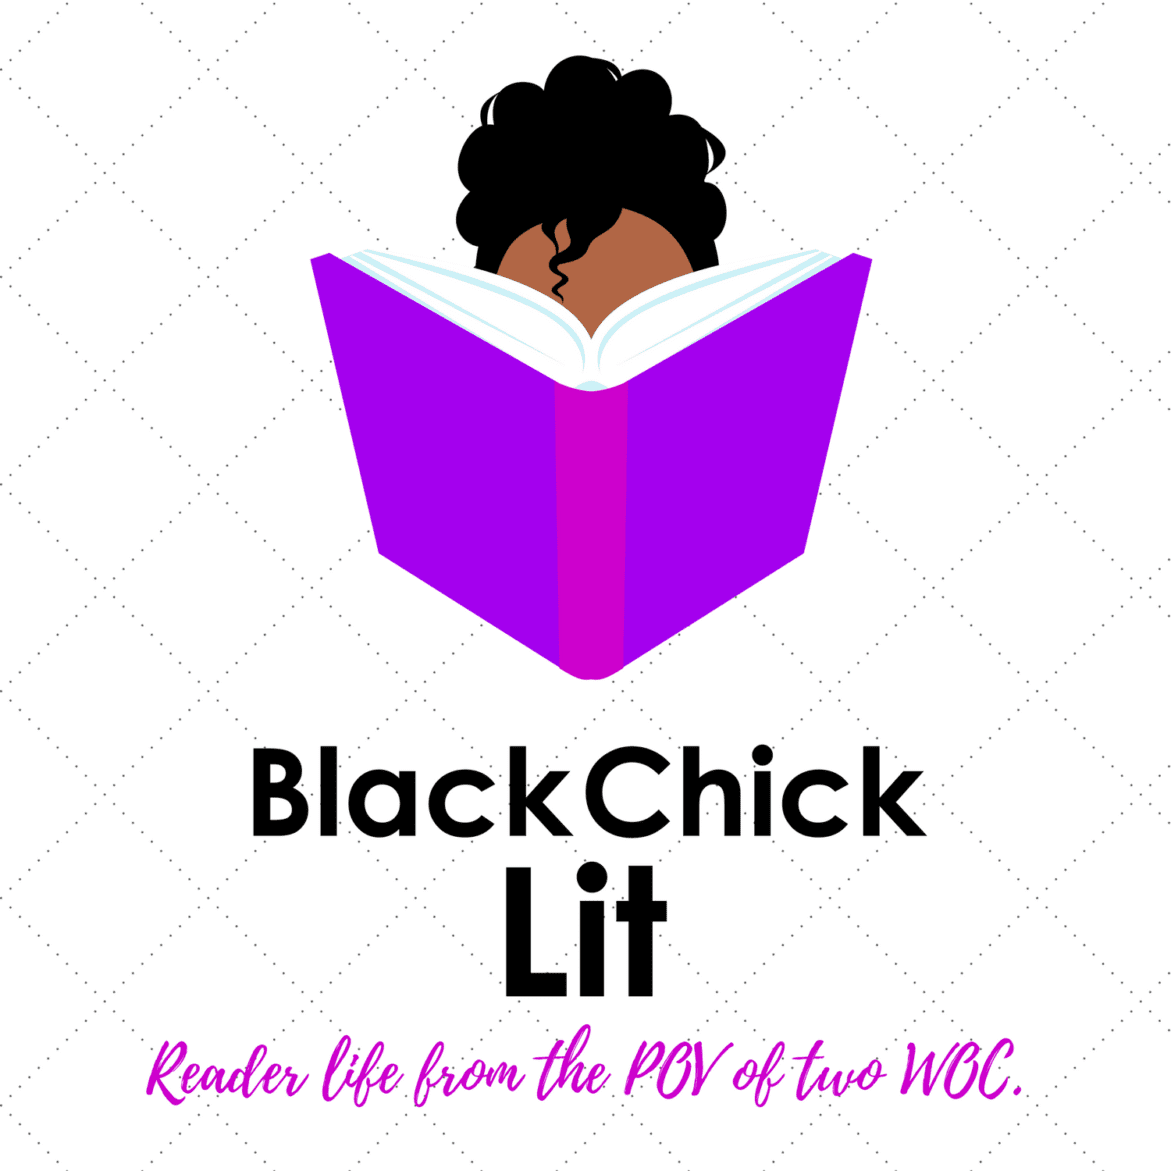 Black Podcasting - BCL Chat: Oh No Baby! What Is You Doin'?